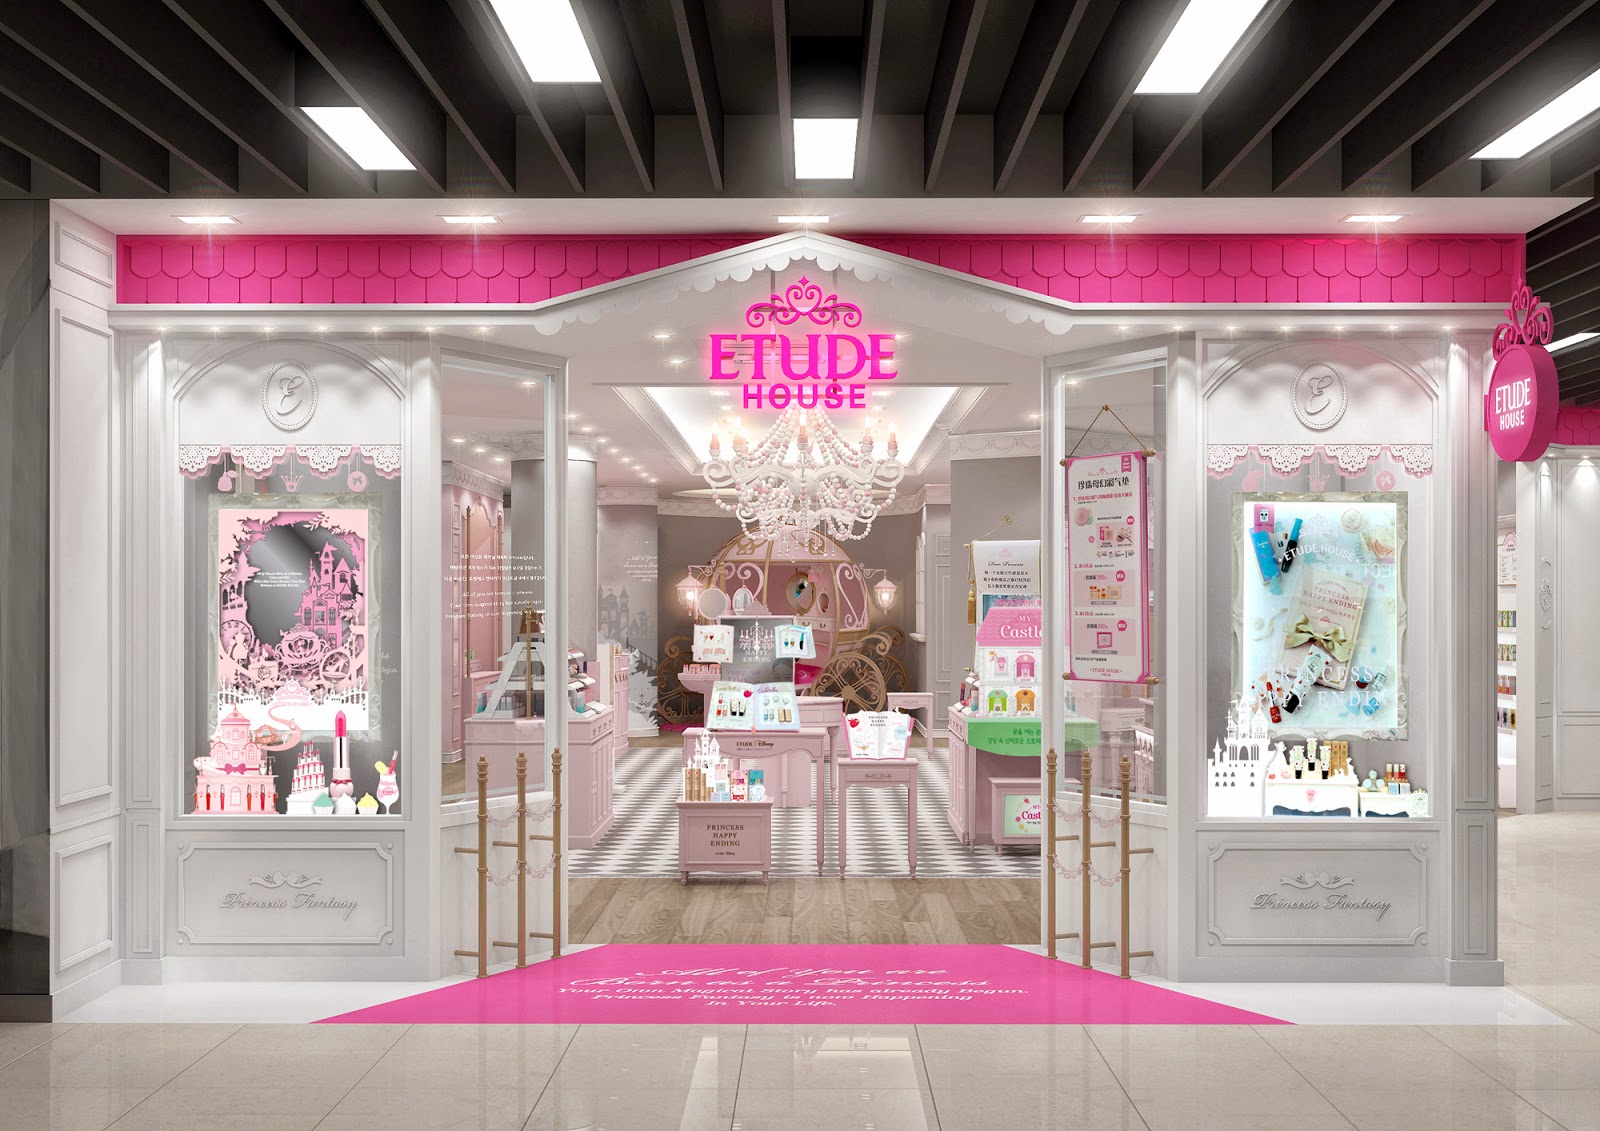 Etude House Flagship Store in Singapore